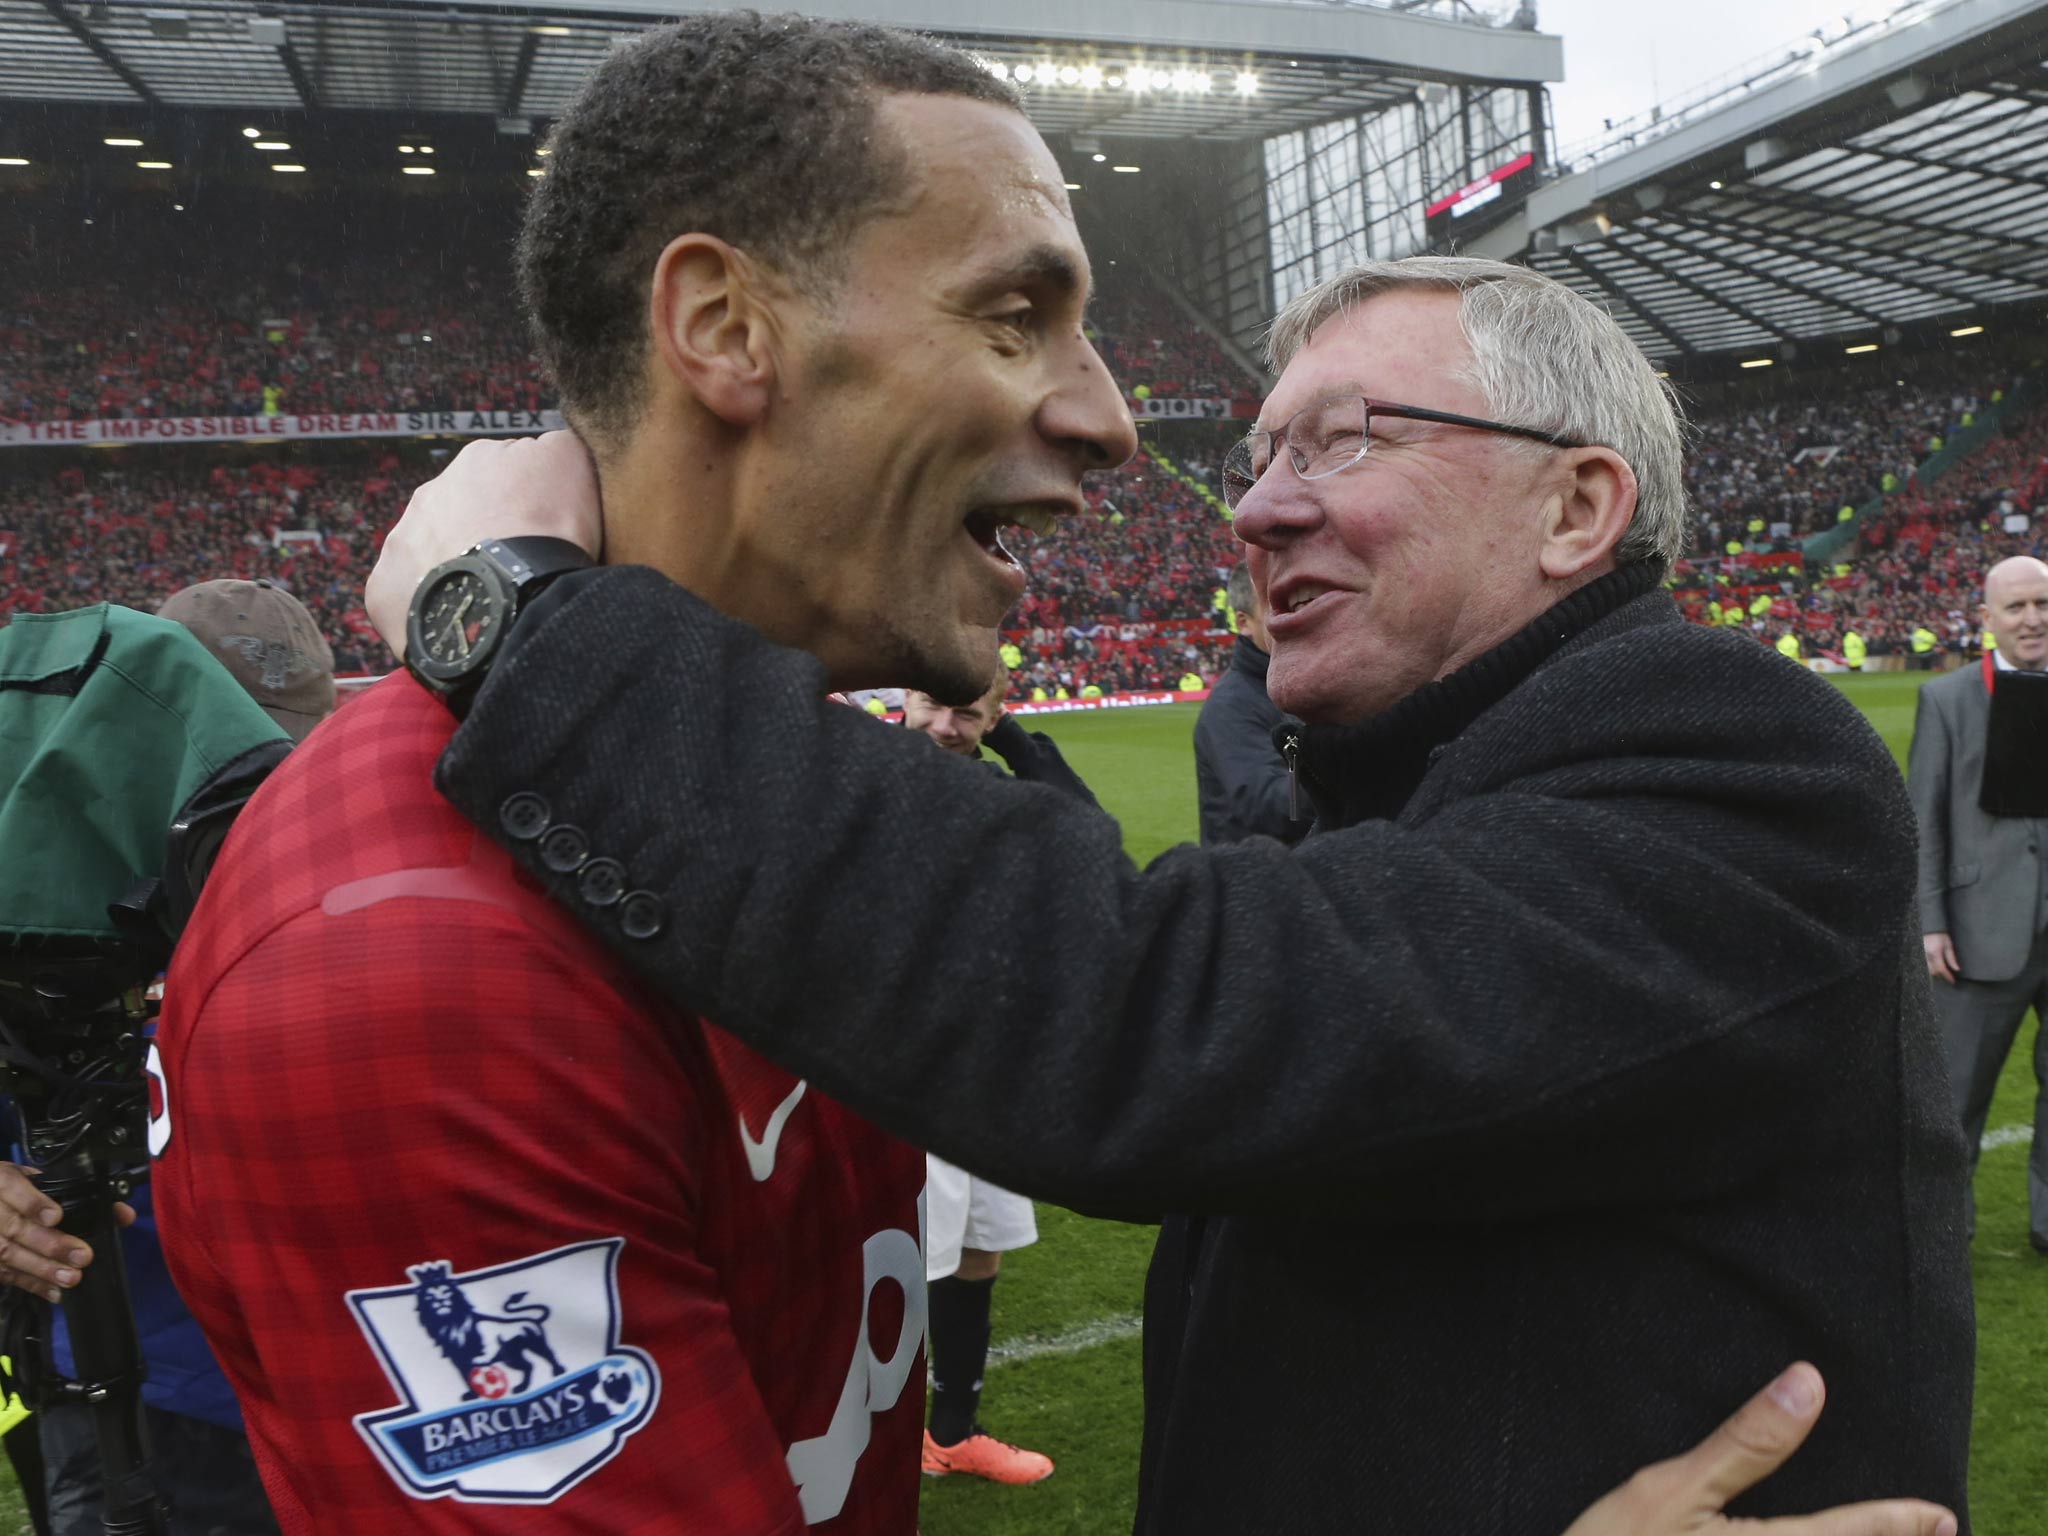 Rio Ferdinand and Sir Alex Ferguson share a moment after the former's winning goal gave Manchester United a 2-1 win over Swansea